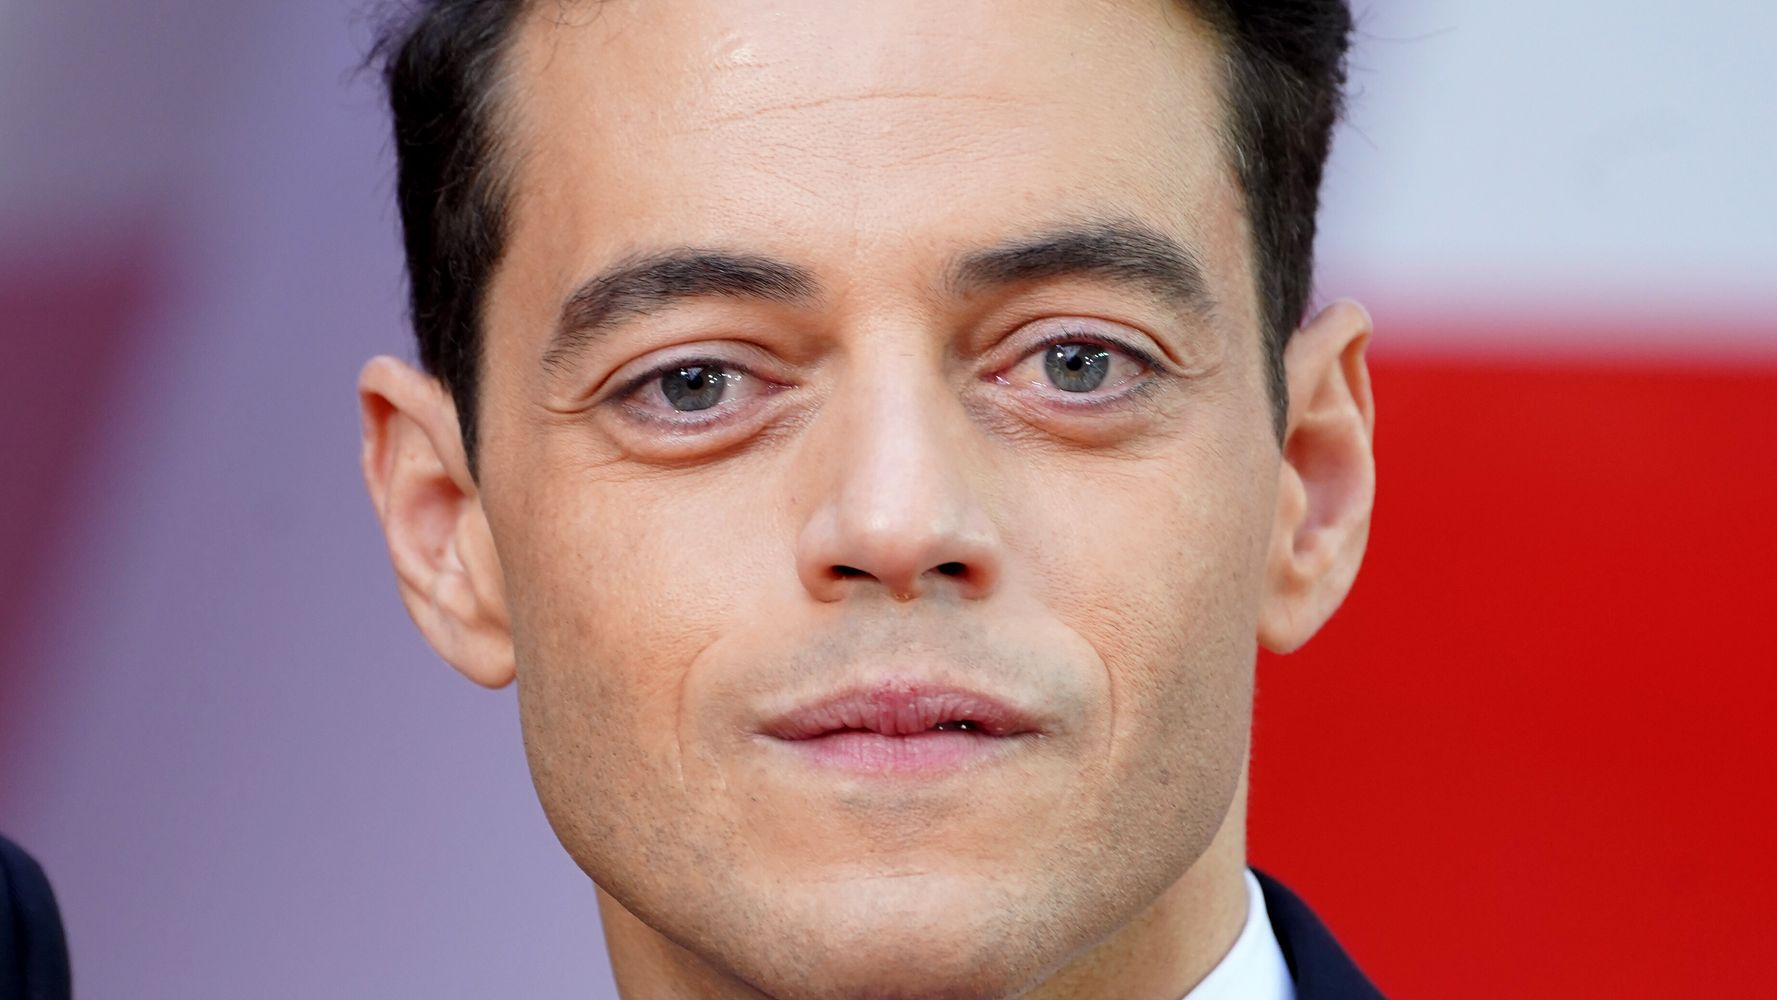 Rami Malek Once Asked Kate Middleton A Question That Left Her 'Taken Aback'